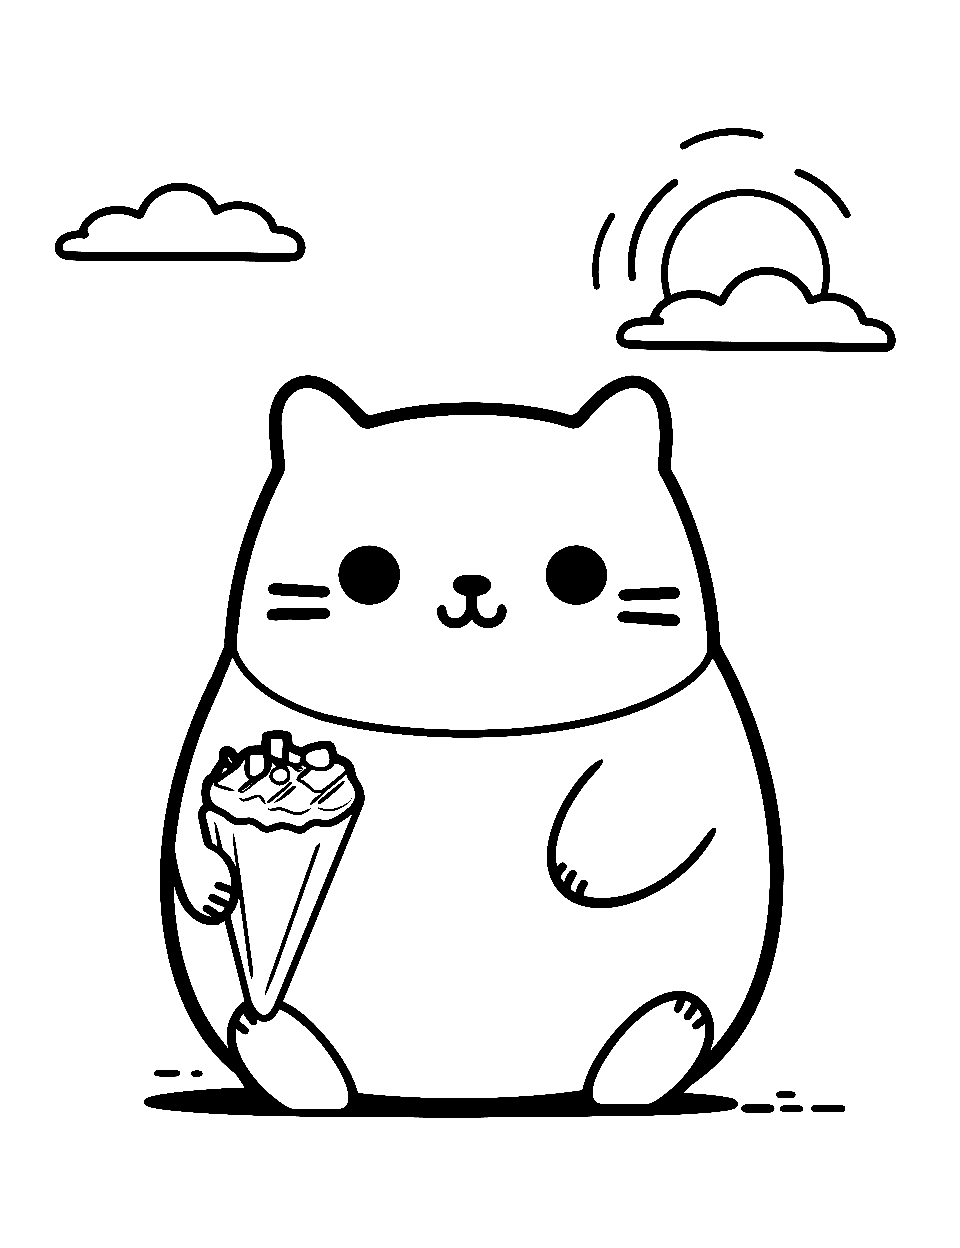 Summer Treats Coloring Page - Pusheen enjoying a cool ice cream on a sunny day.